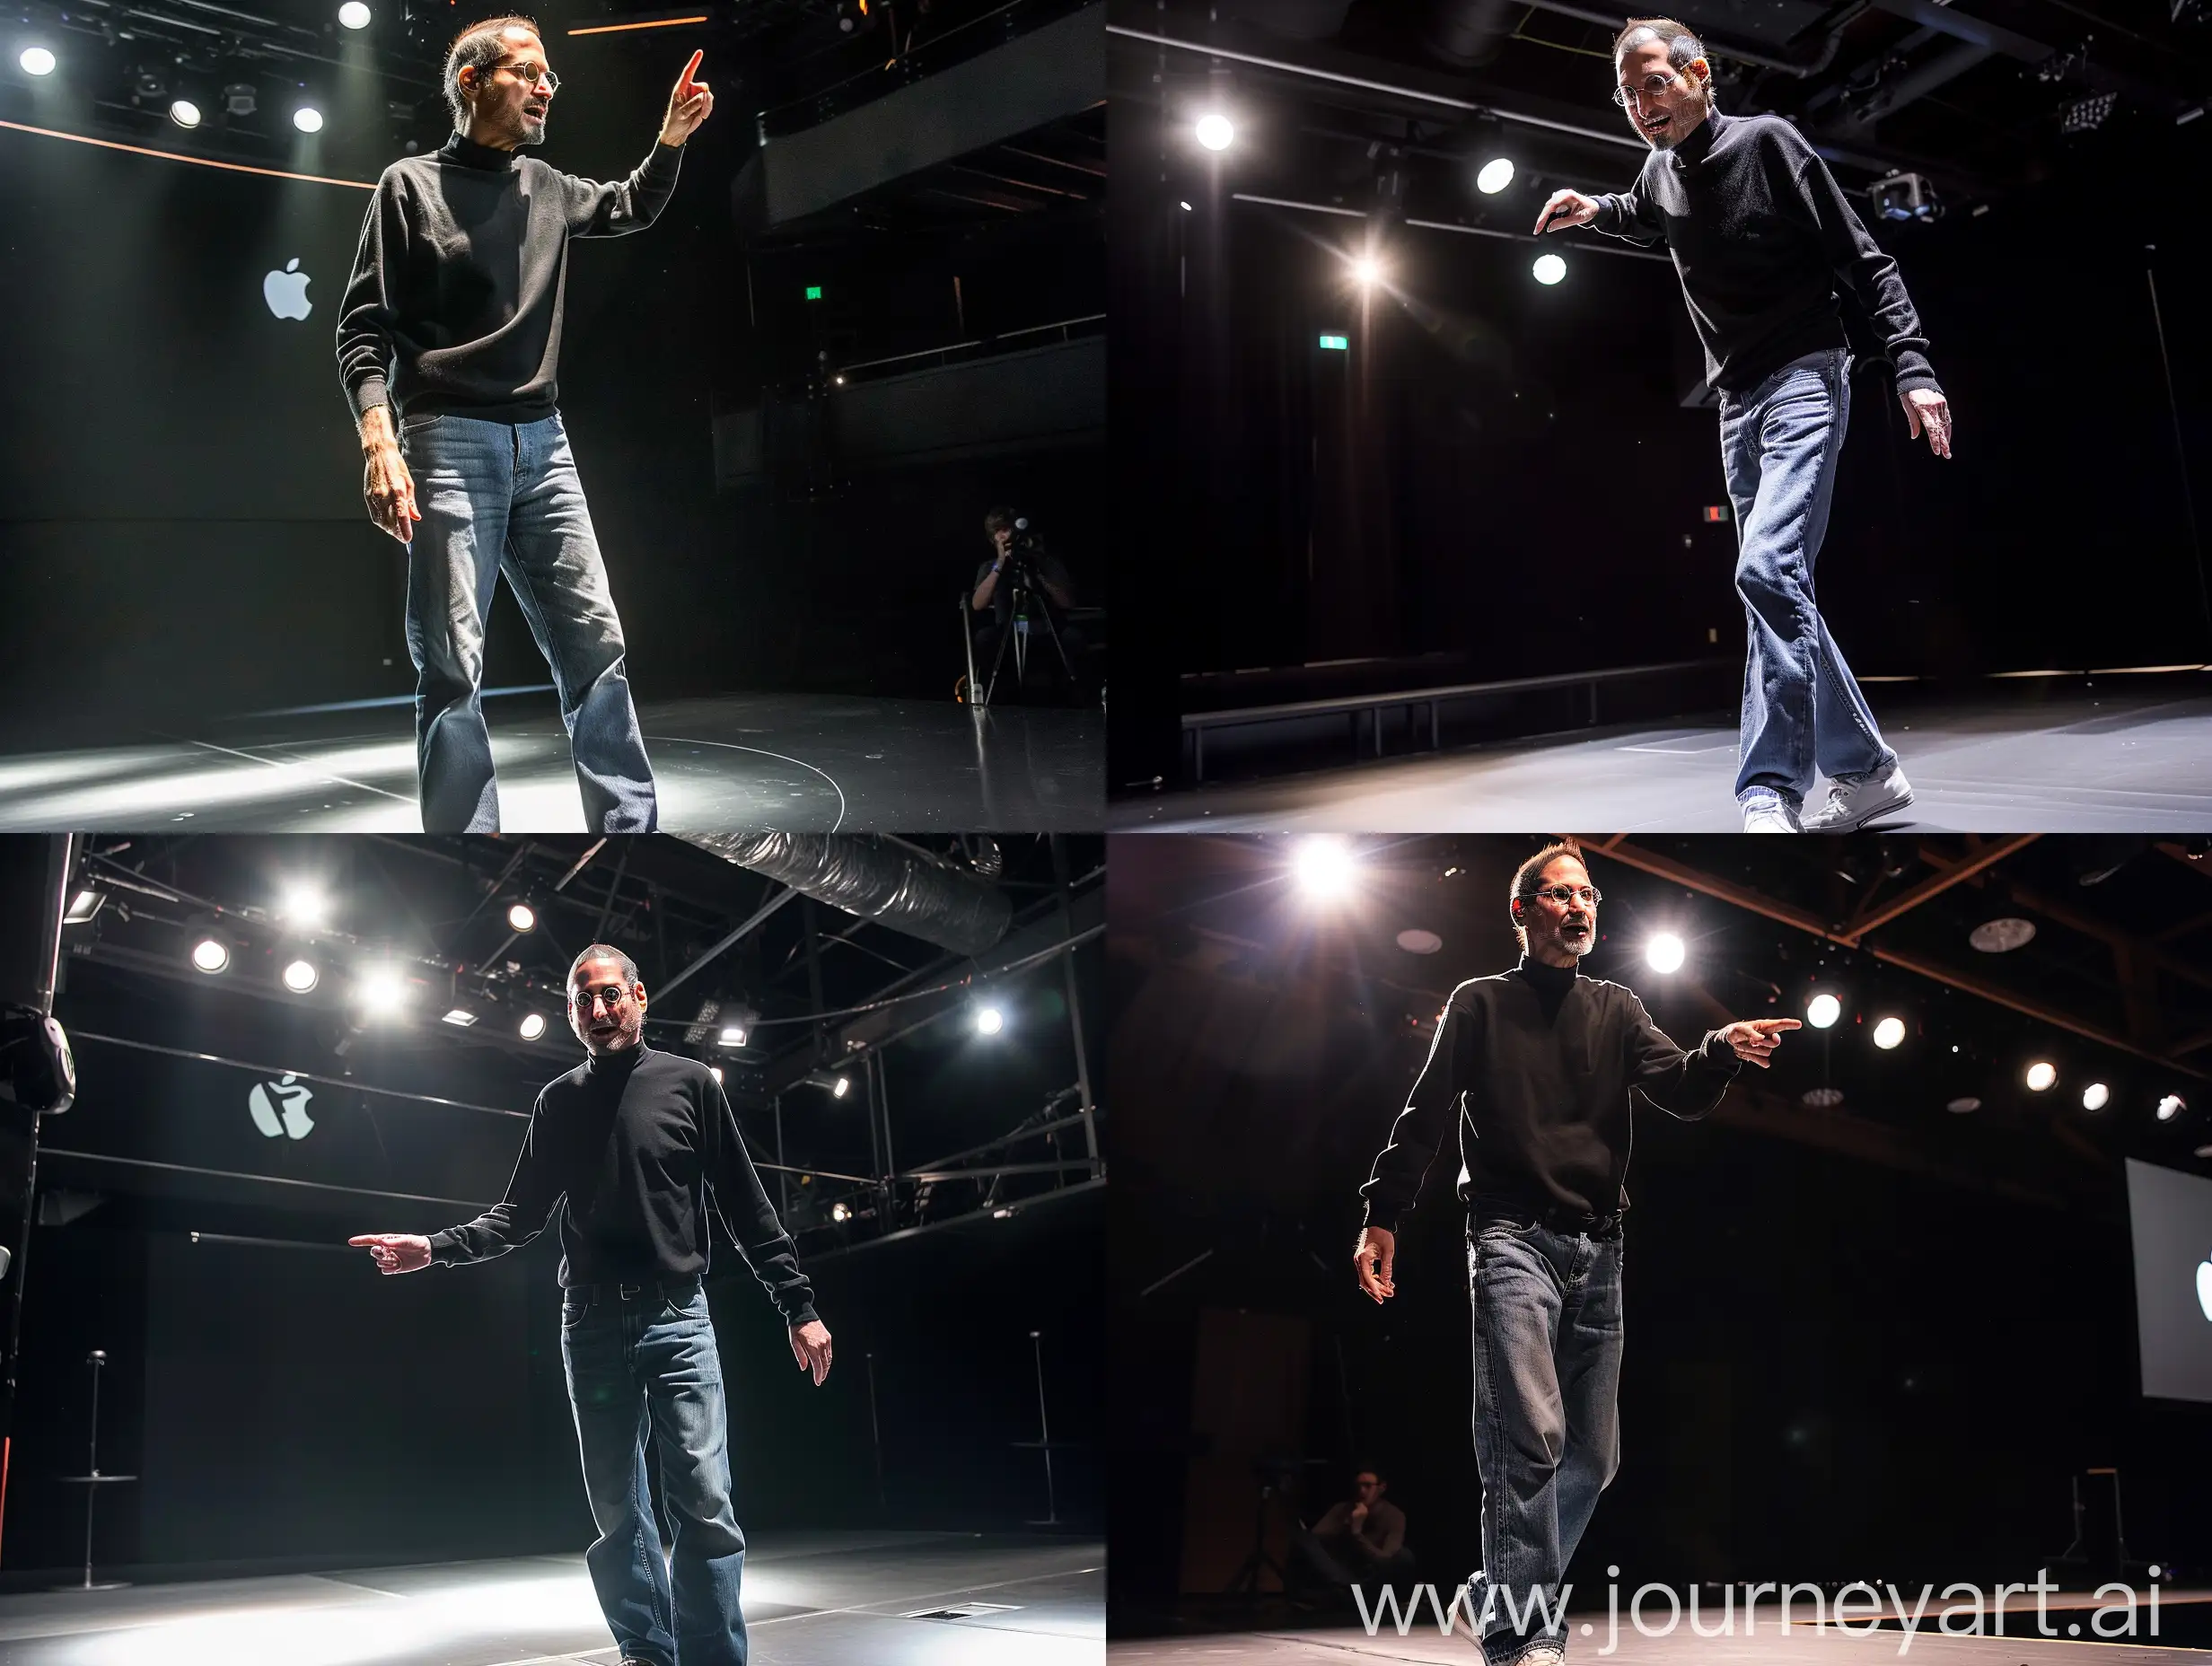 Portrait of Steve Jobs giving a lecture on the stage of a technology presentation room, wearing his characteristic black turtleneck sweater, jeans, and sneakers. The lighting comes from overhead spotlights creating a dramatic effect, highlighting his figure against the dark background of the stage. The composition includes Jobs in a dynamic pose, with one hand raised pointing towards a large screen behind him, where the Apple logo is projected. This portrait captures the moment with a shallow depth of field, using a Nikon D850 DSLR camera, with a Nikkor 85mm f/1.4 lens, capturing Jobs' intensity and passion for innovation. The style of the photography is inspired by the work of Annie Leibovitz, focusing on the subject's expressiveness and the significant use of lighting and shadow to add depth and character to the image.